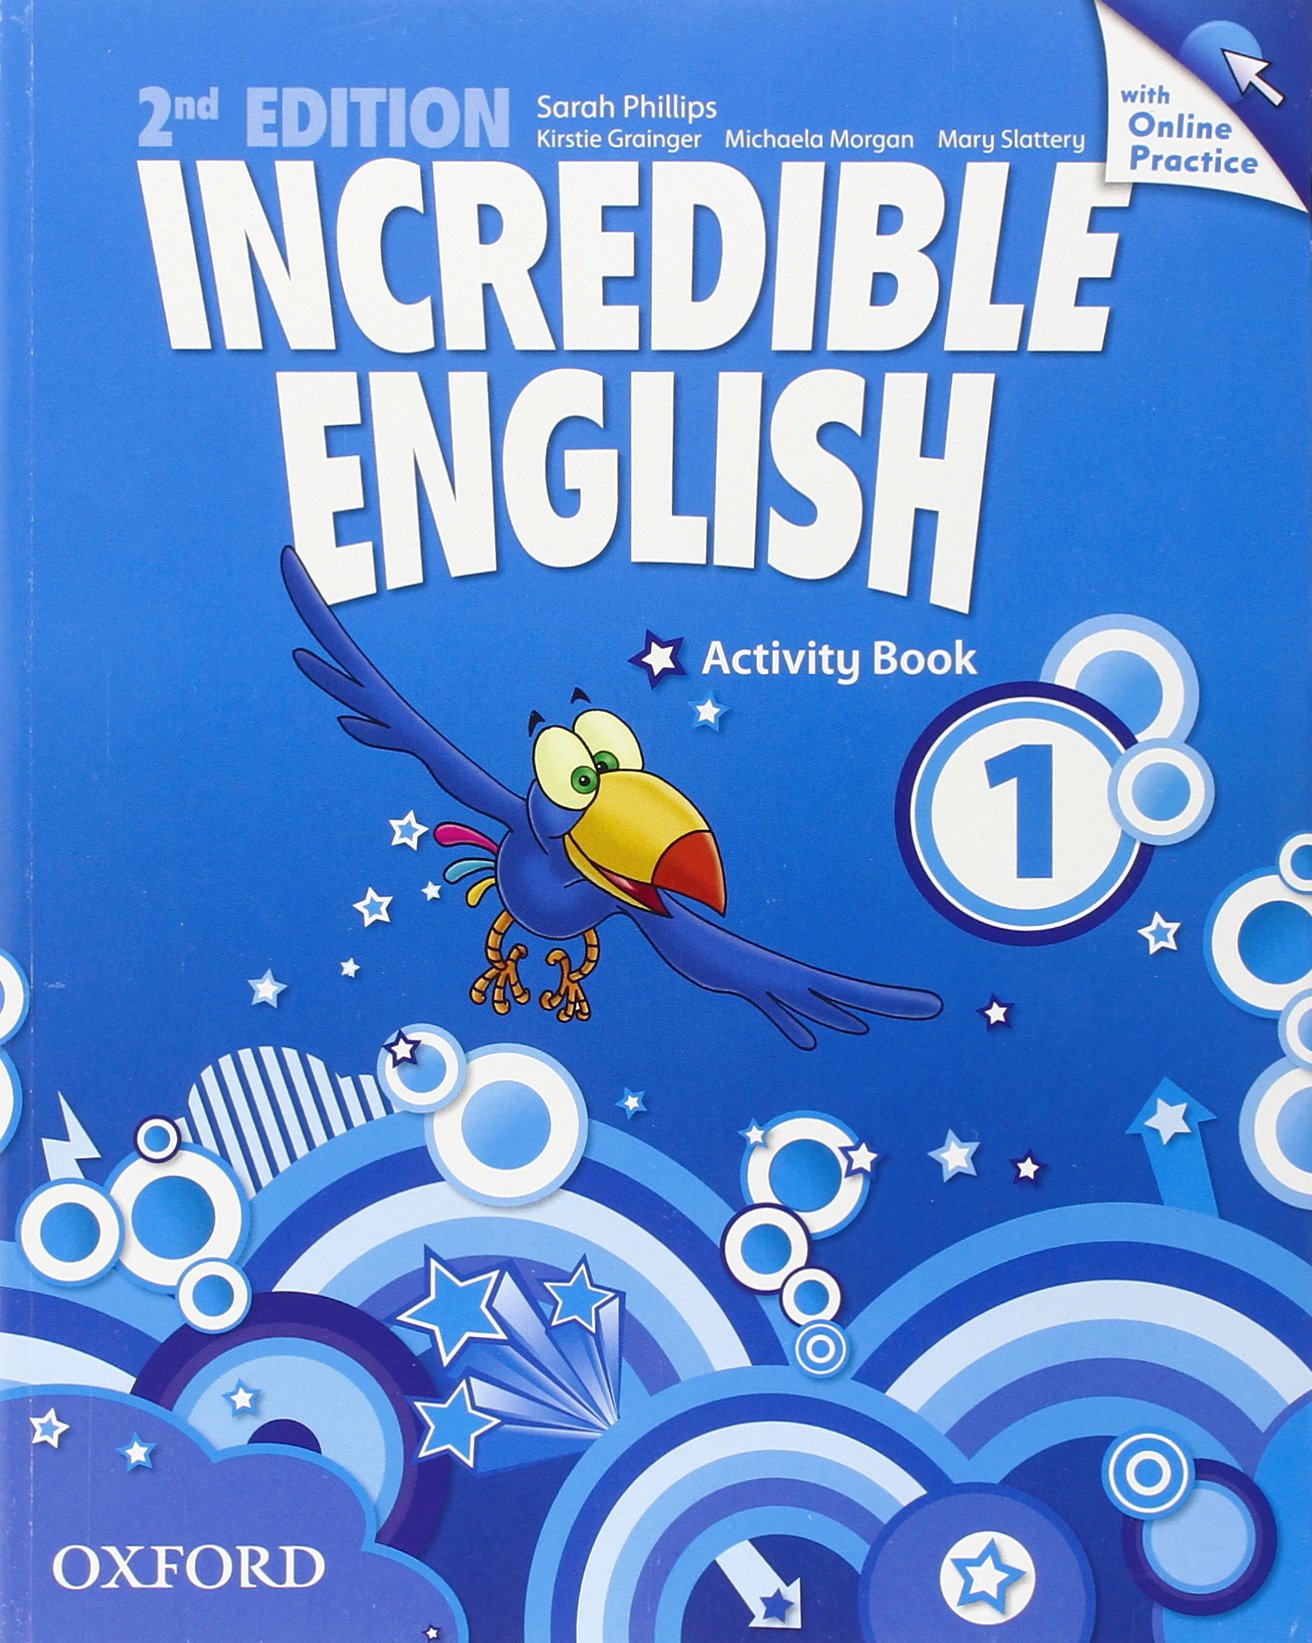 INCREDIBLE ENGLISH  2nd ED 1 Activity Book + Online Practice